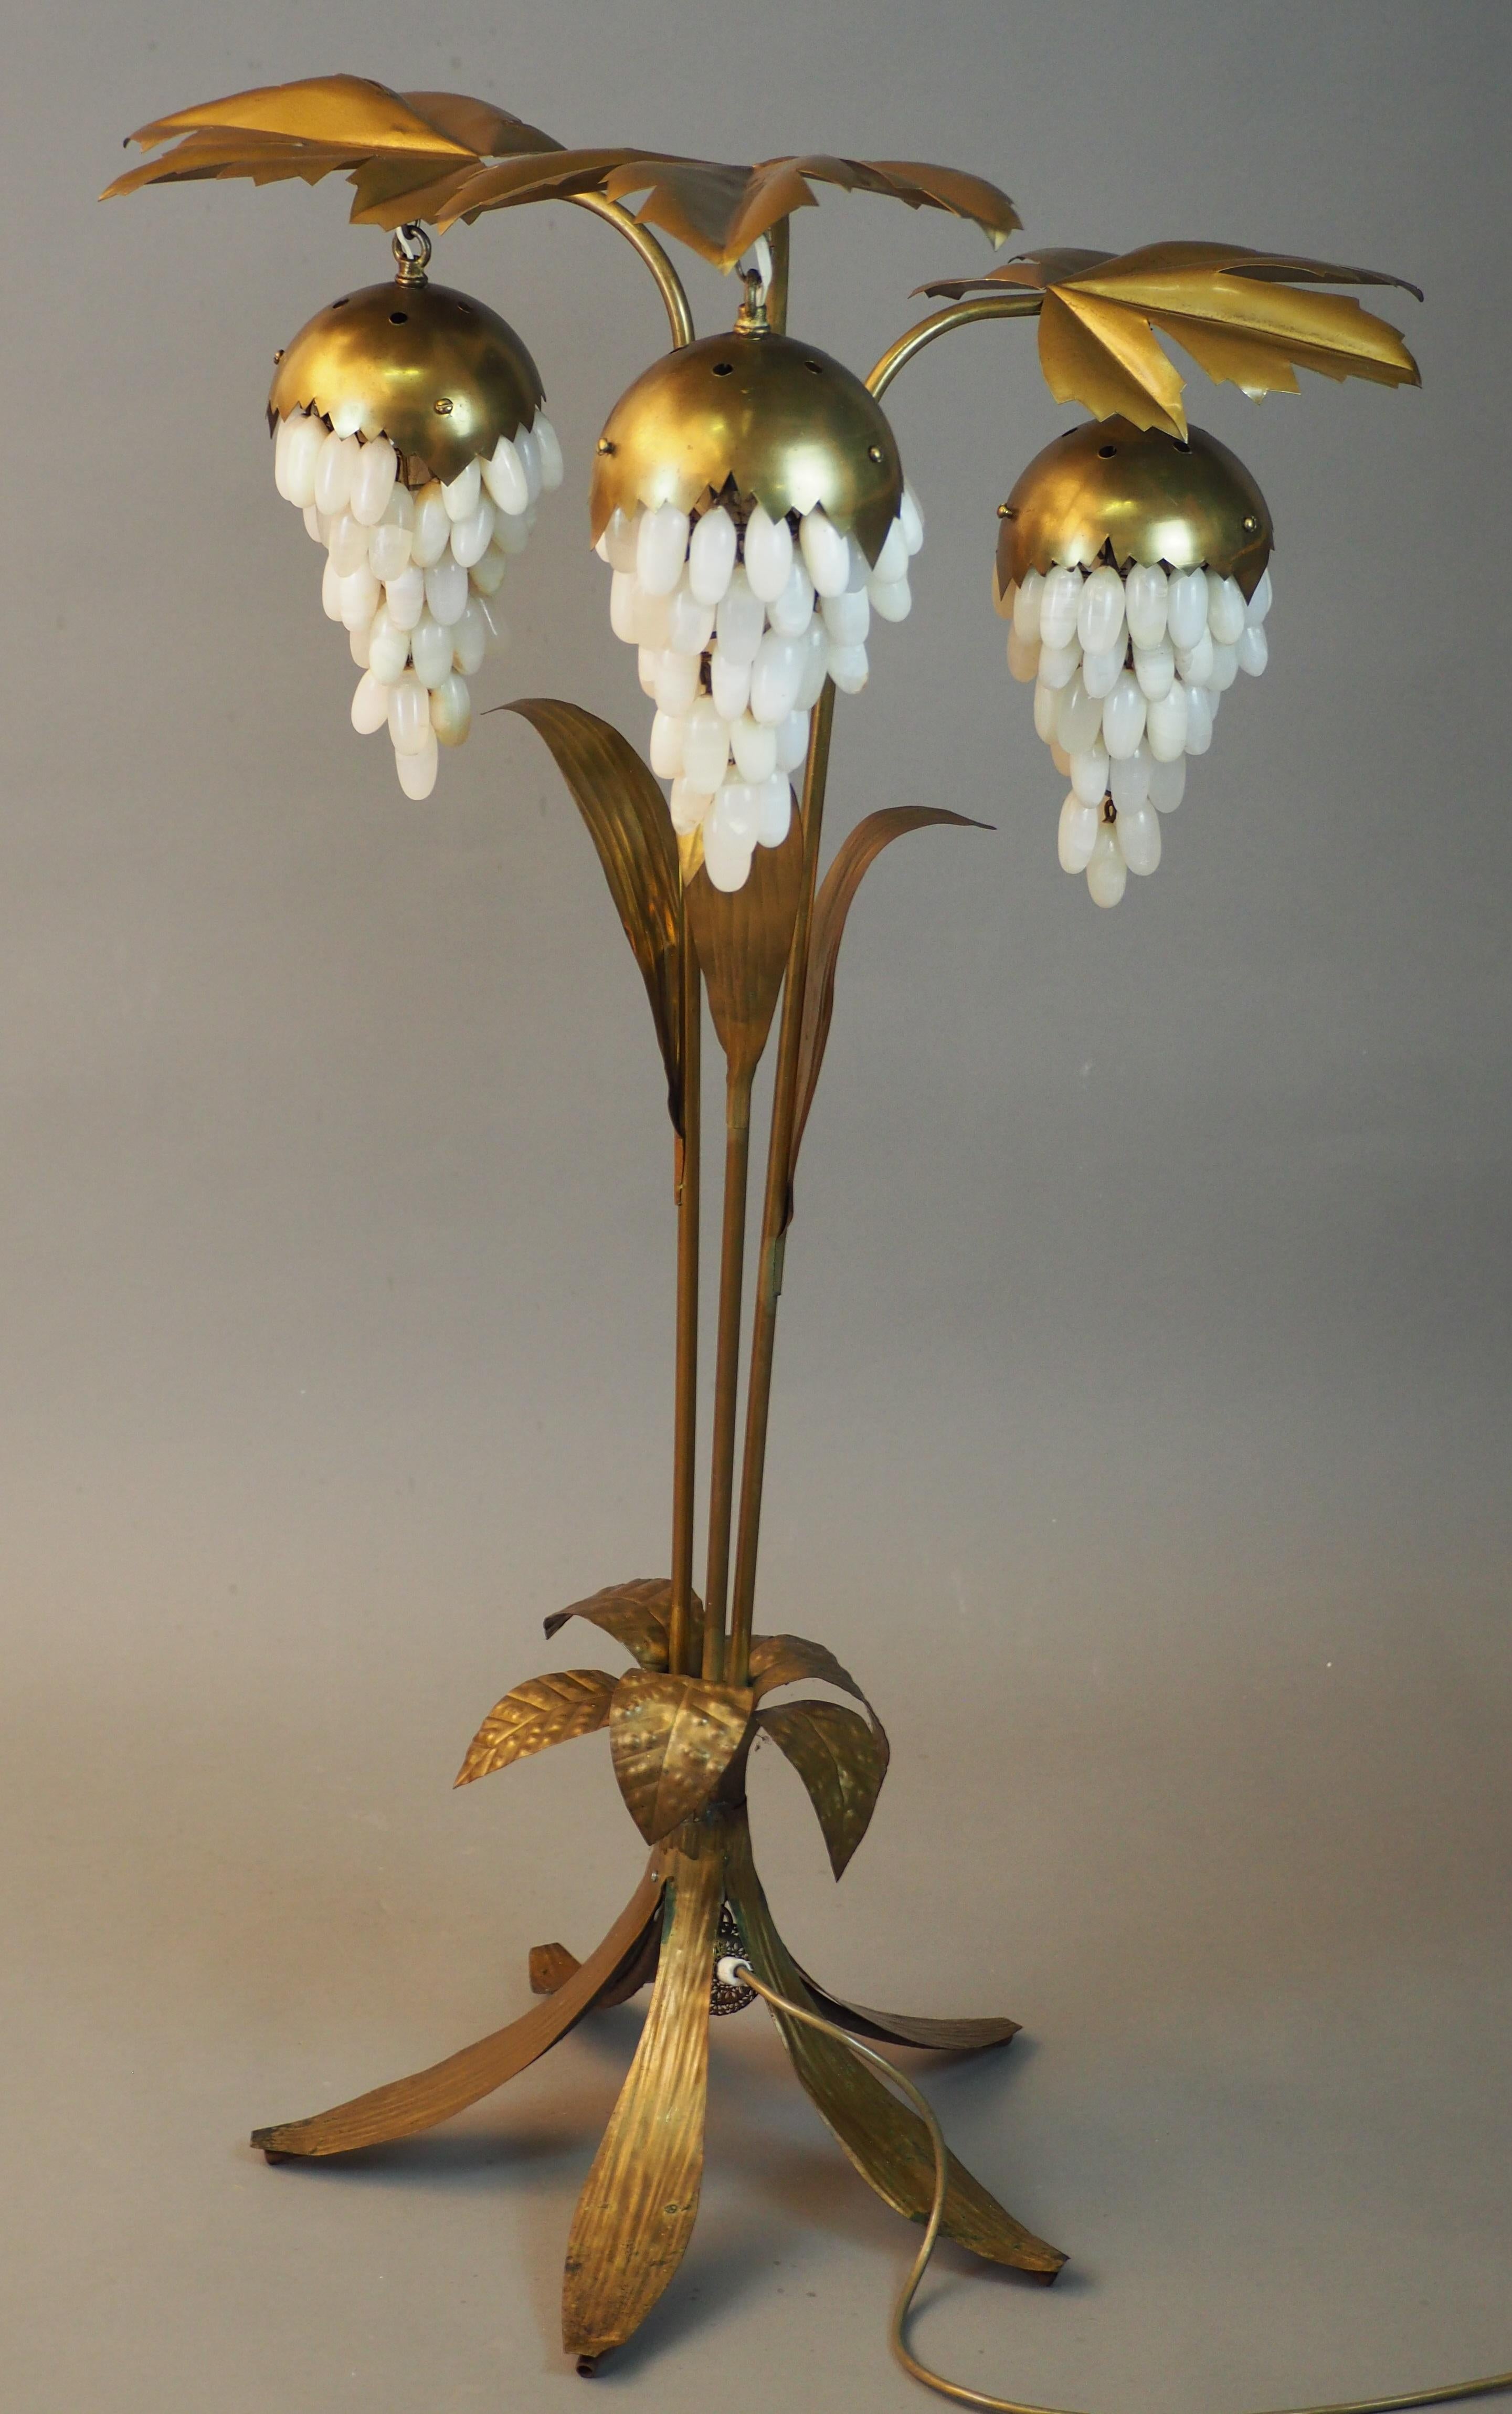 Mid-Century Brass Floor Lamp with Leafs and Alabaster Grapes, circa 1950s For Sale 2